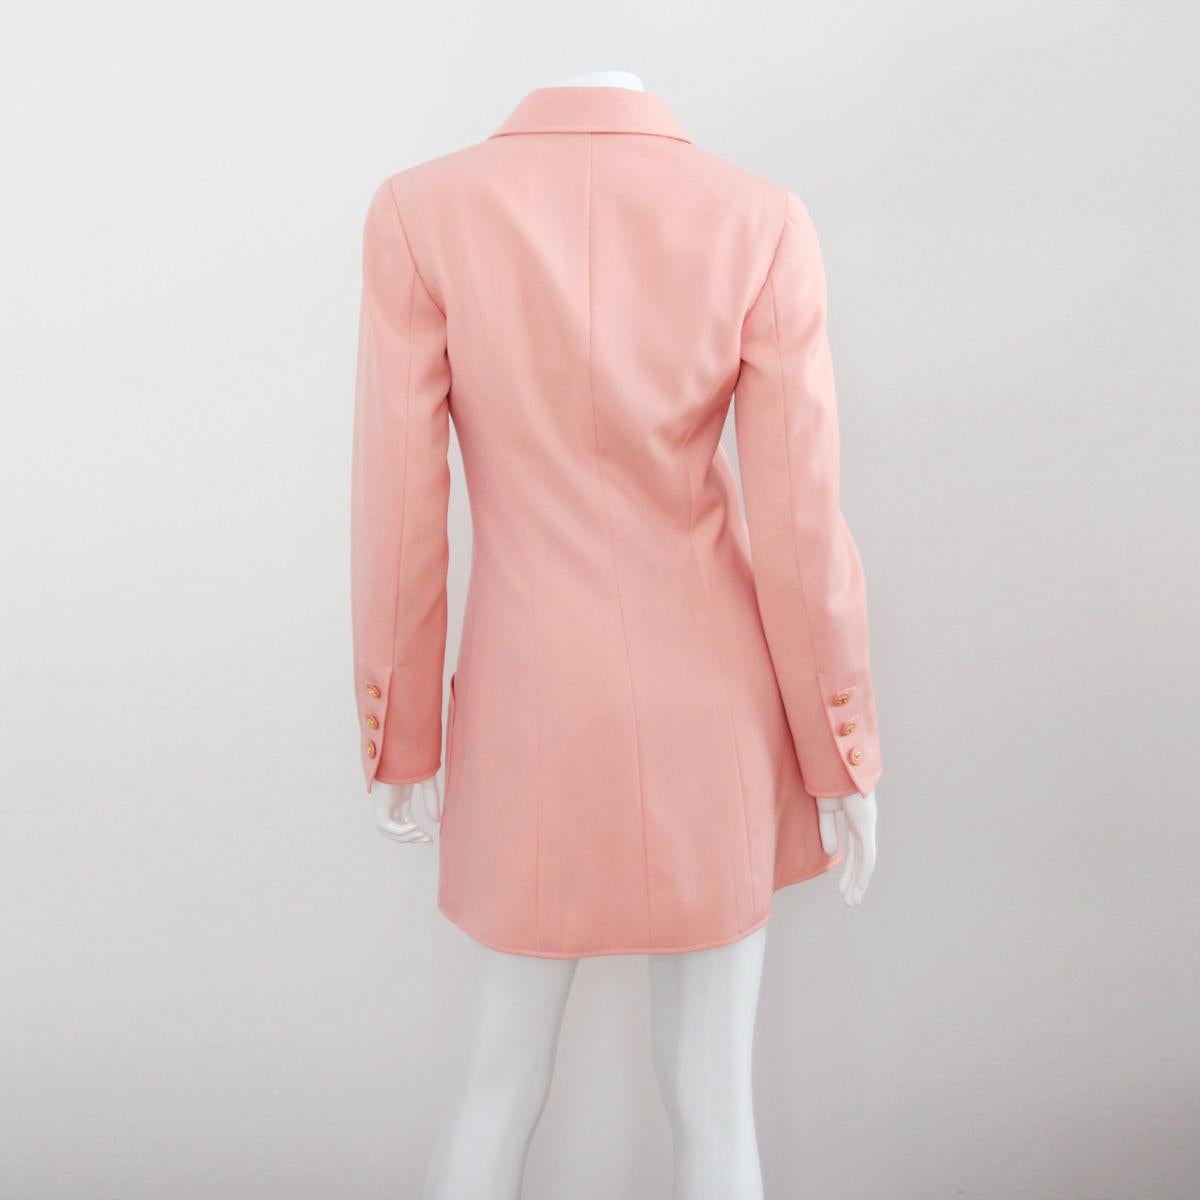 CHANEL 1997 Pink Jacket & Jumpsuit Set - CC Logo Buttons by Karl Lagerfeld 2